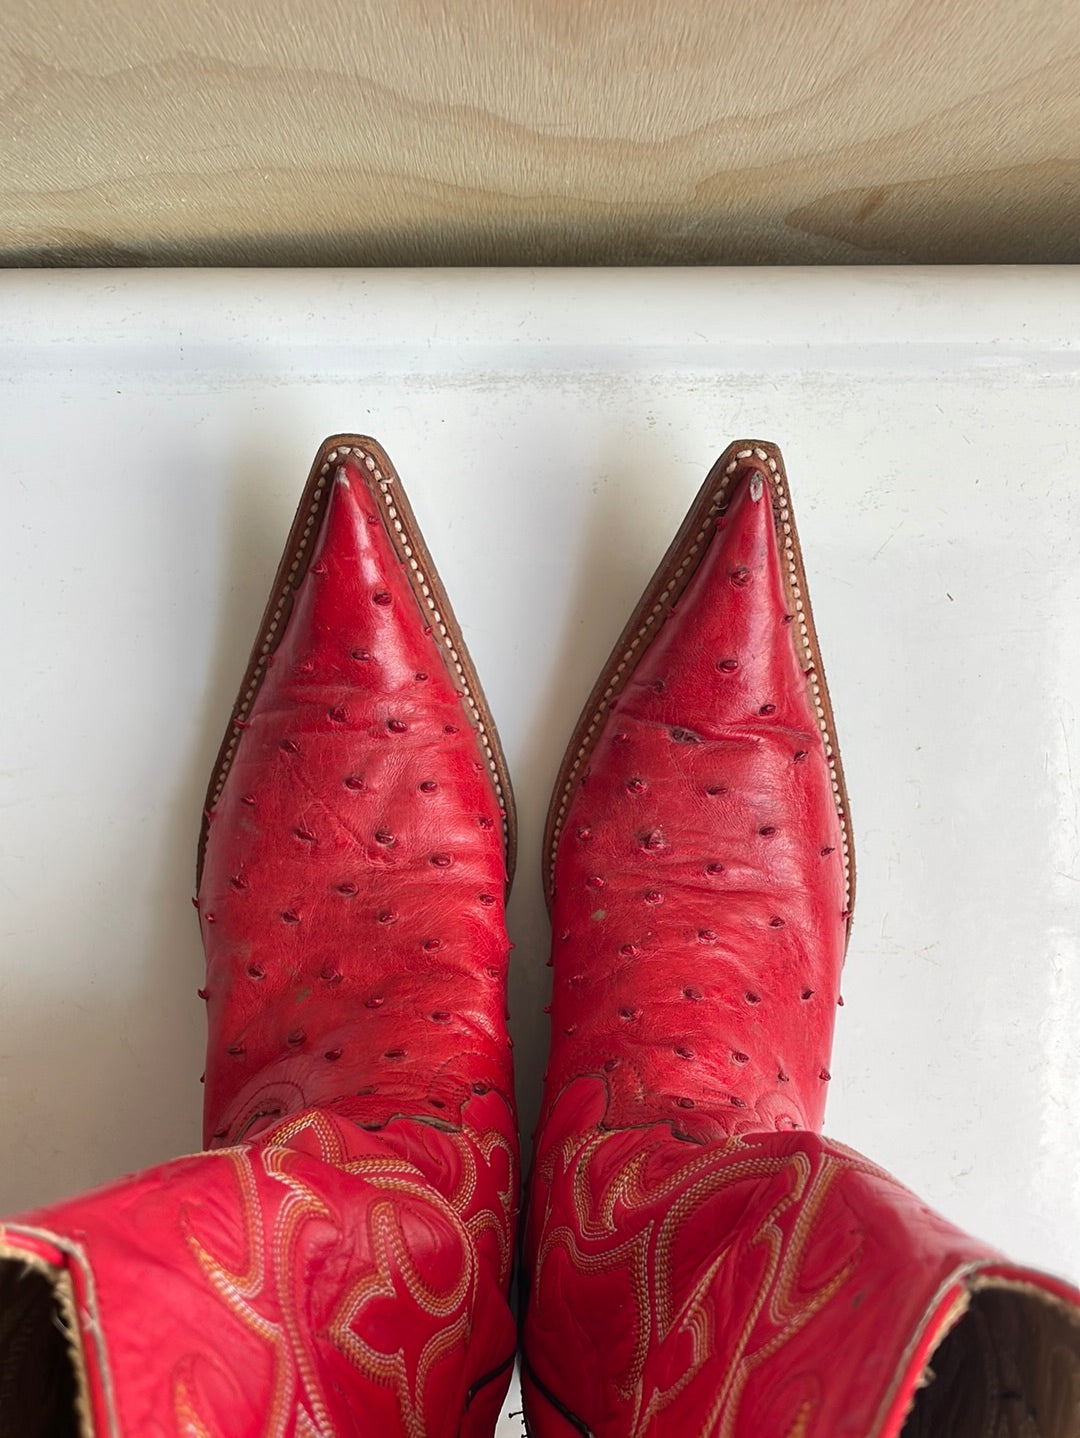 Red Leather Boots - Handmade in Mexico